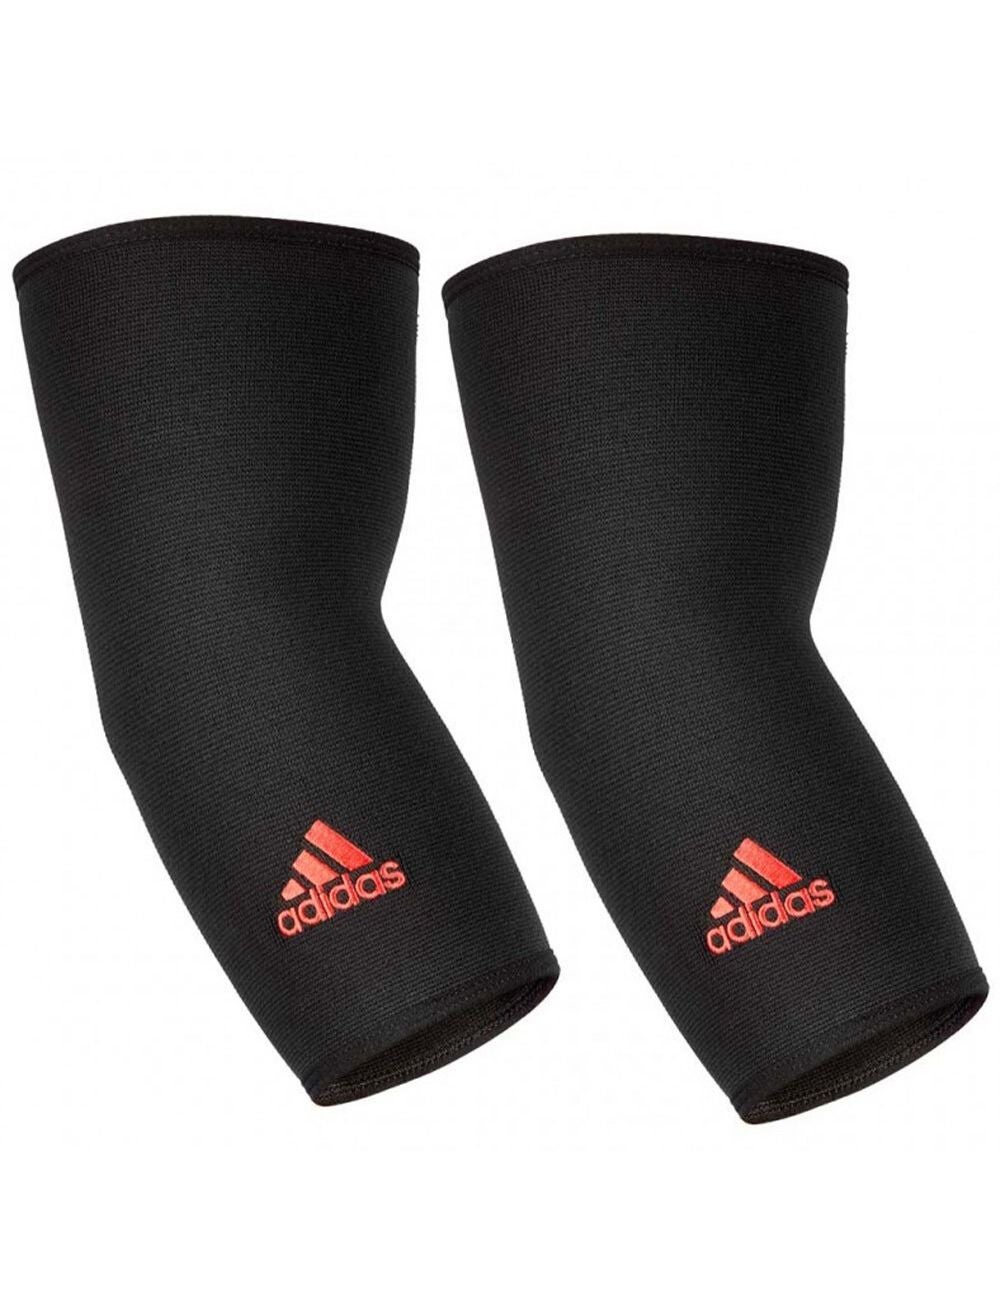 Adidas Ankle Support - 2 Pack | Rockmans